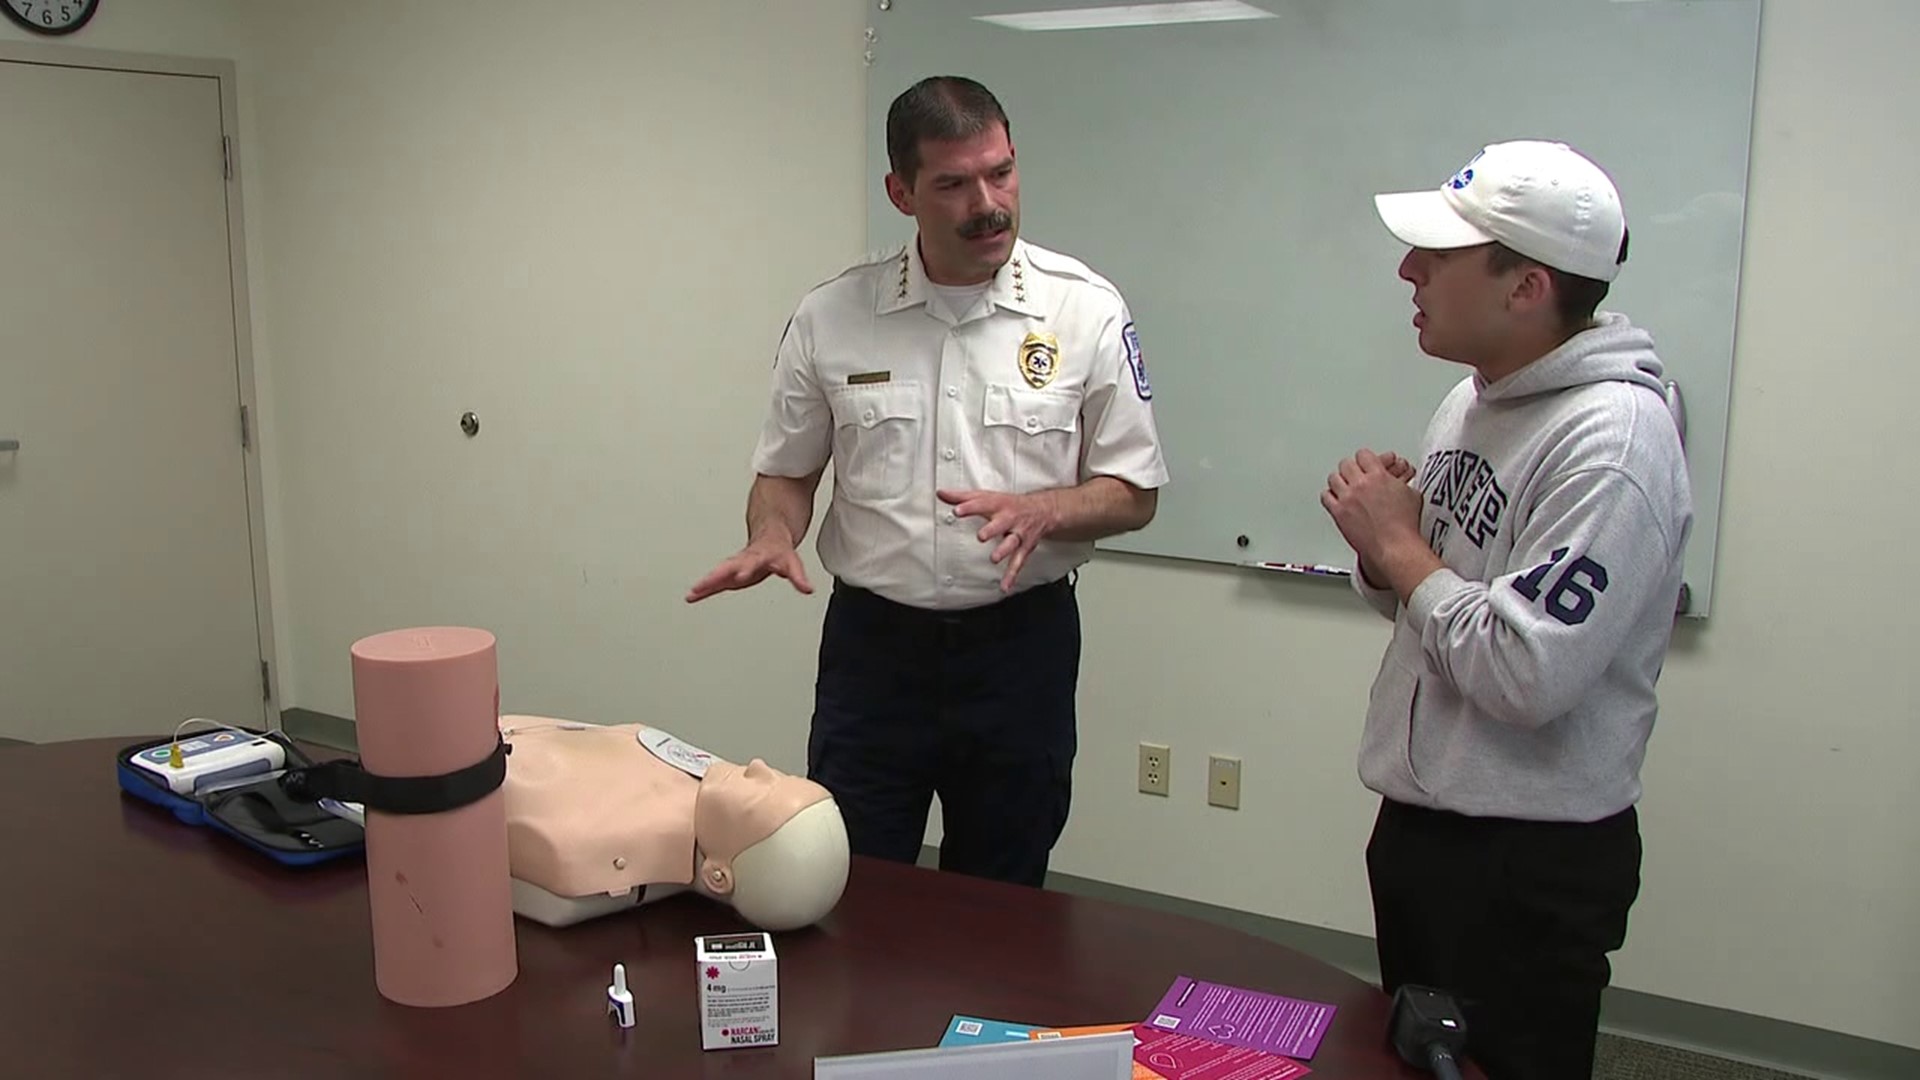 UPMC and local EMS are working together to train the public on life-saving techniques.